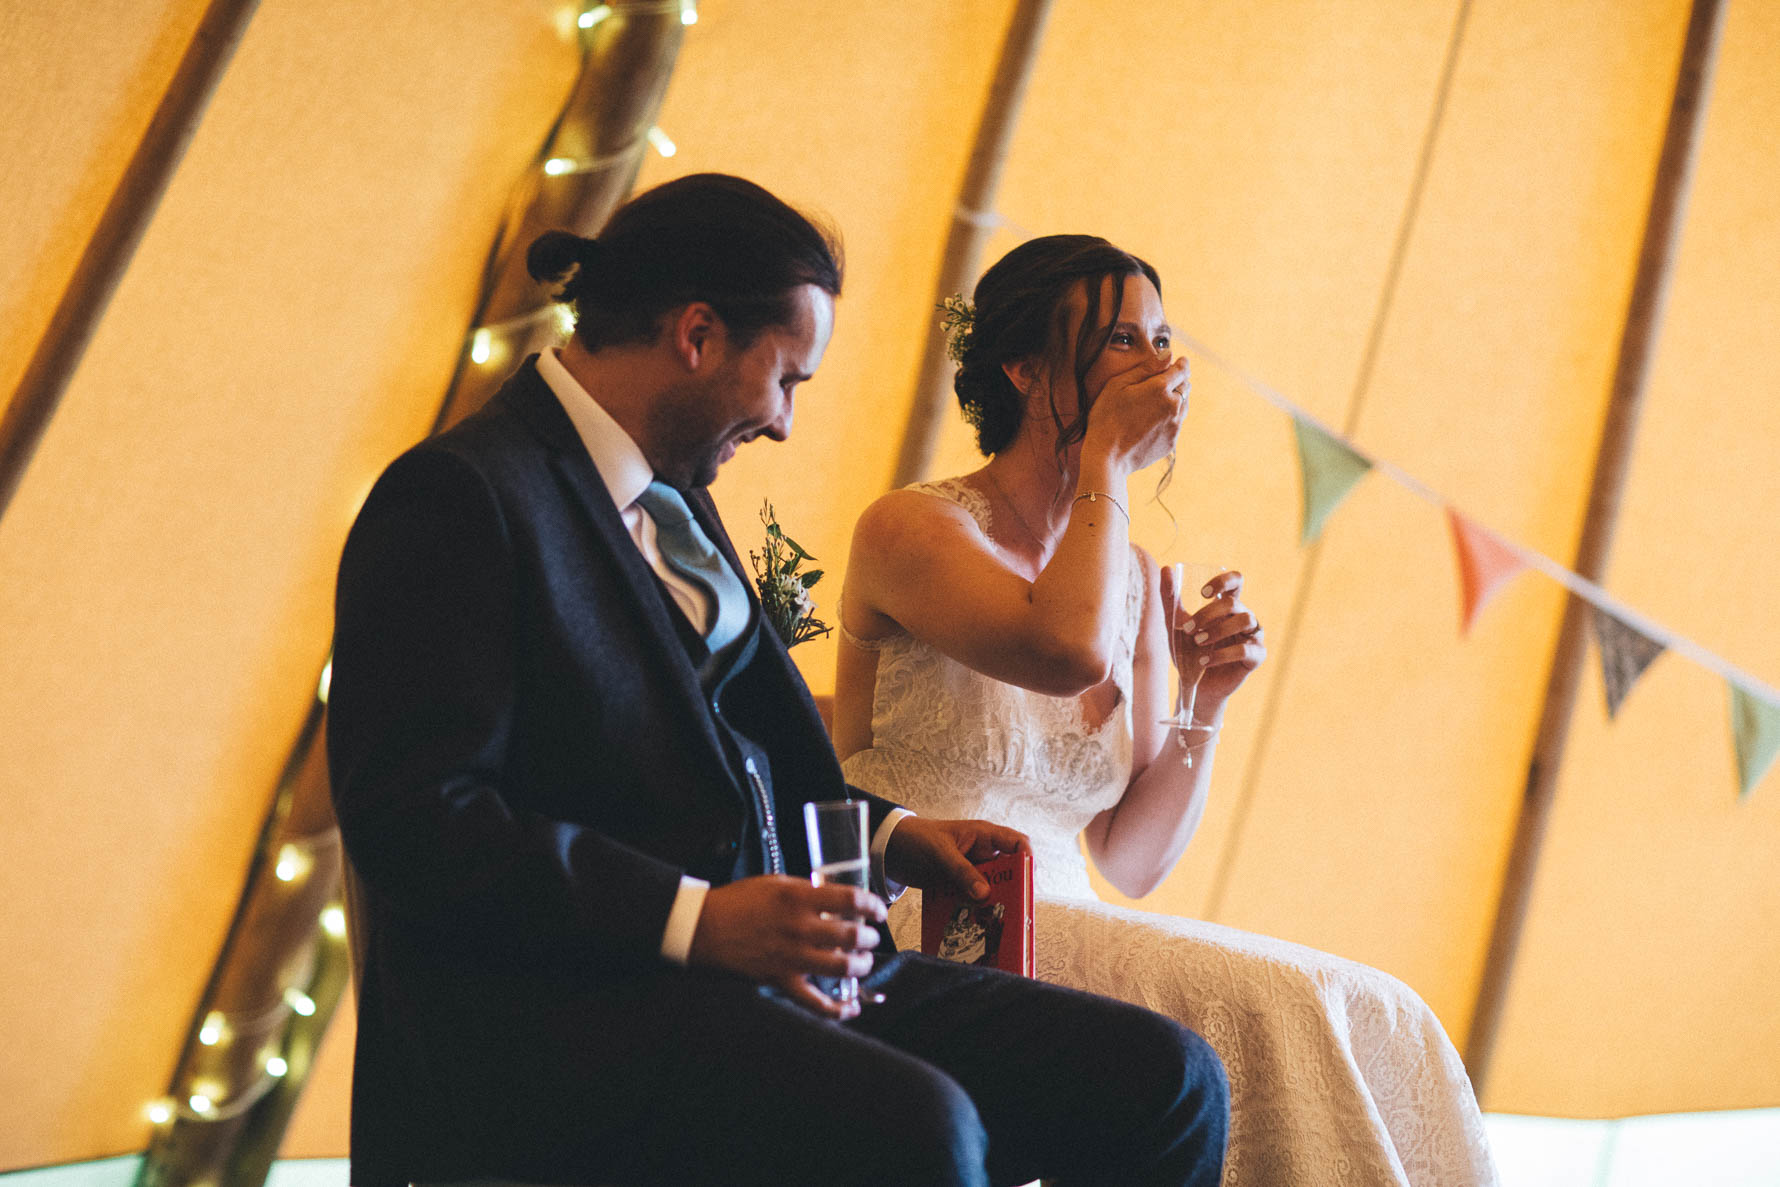 Bride and groom sat laughing as a speech is being read out. There are fairylights and bunting behind them against the side of the yellow tipi they are sat in